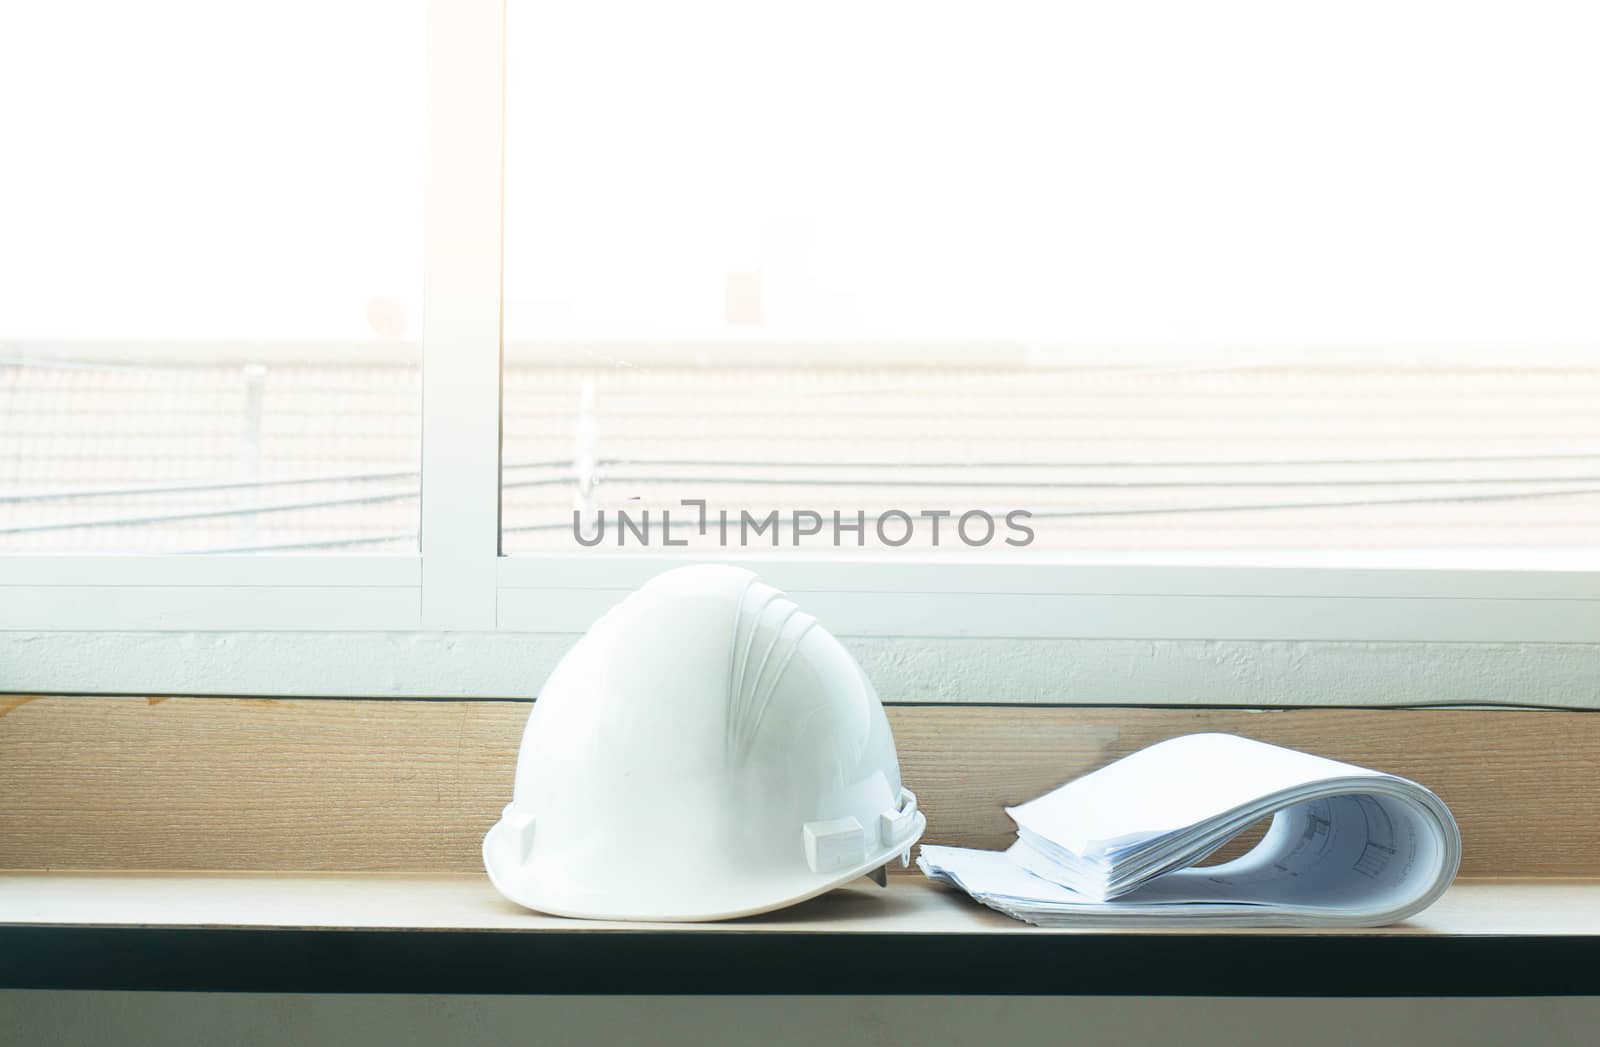 Construction drawing blueprints and white hard hat on table. by peandben